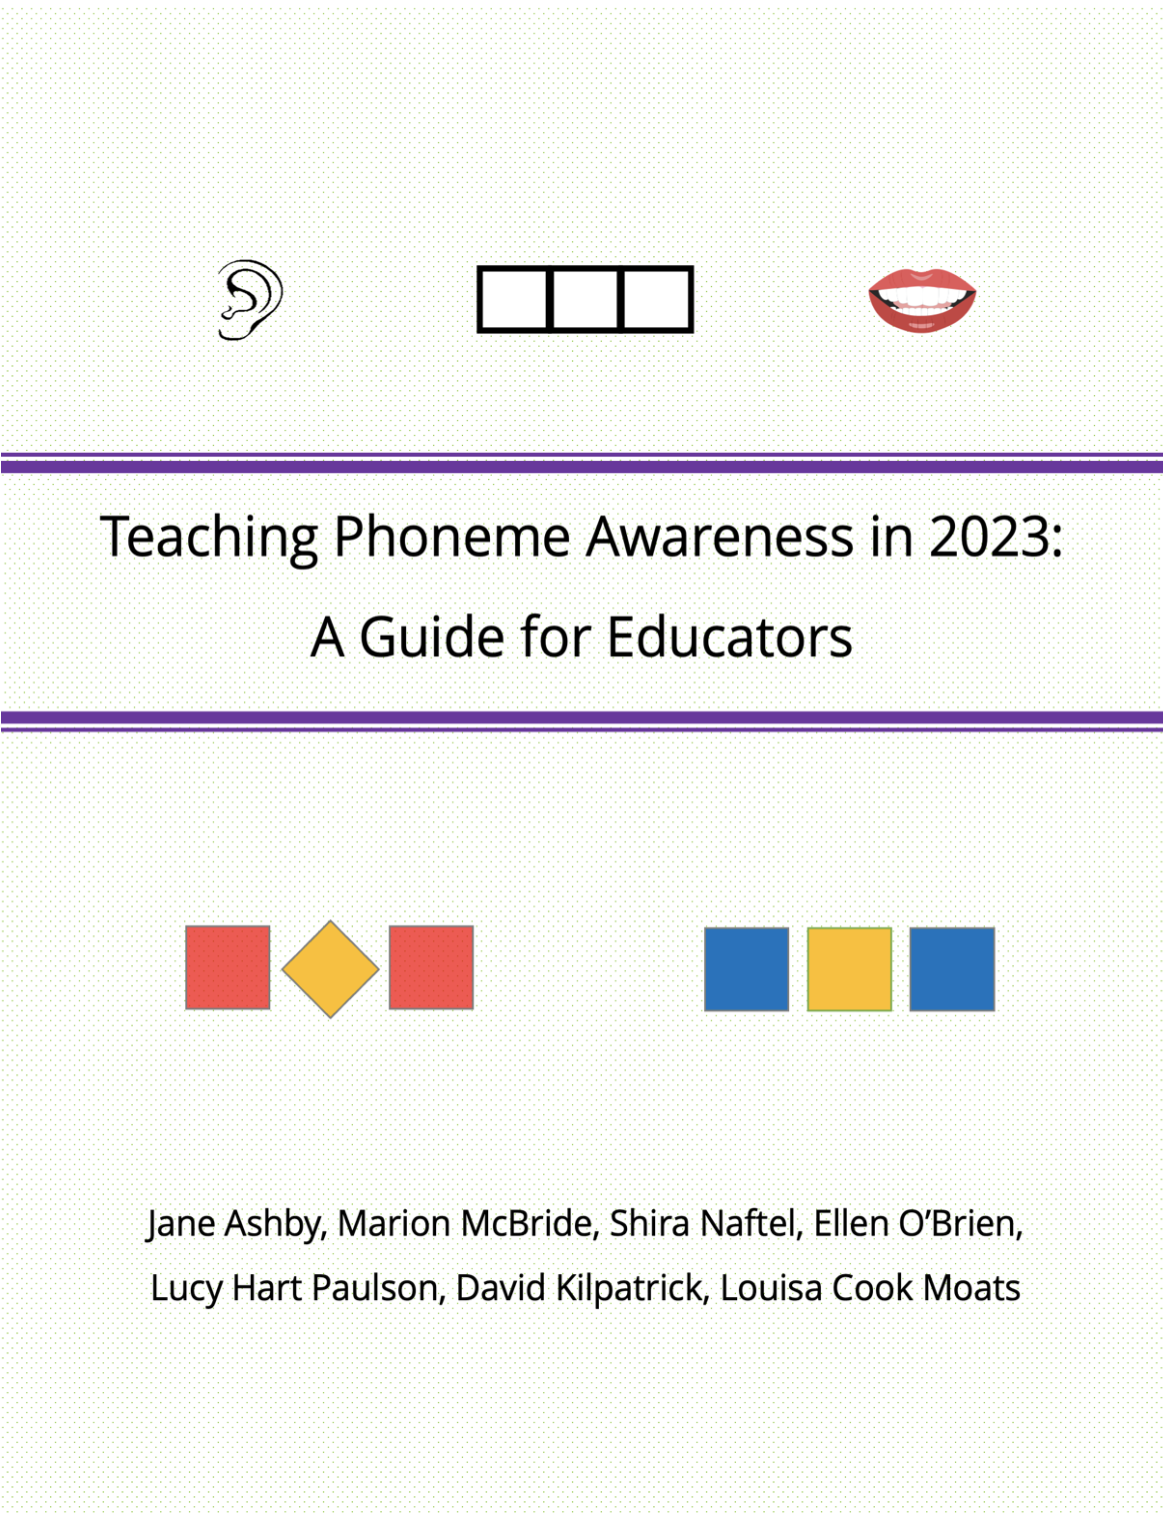 Teaching PA in 2023_A Guide for Educators